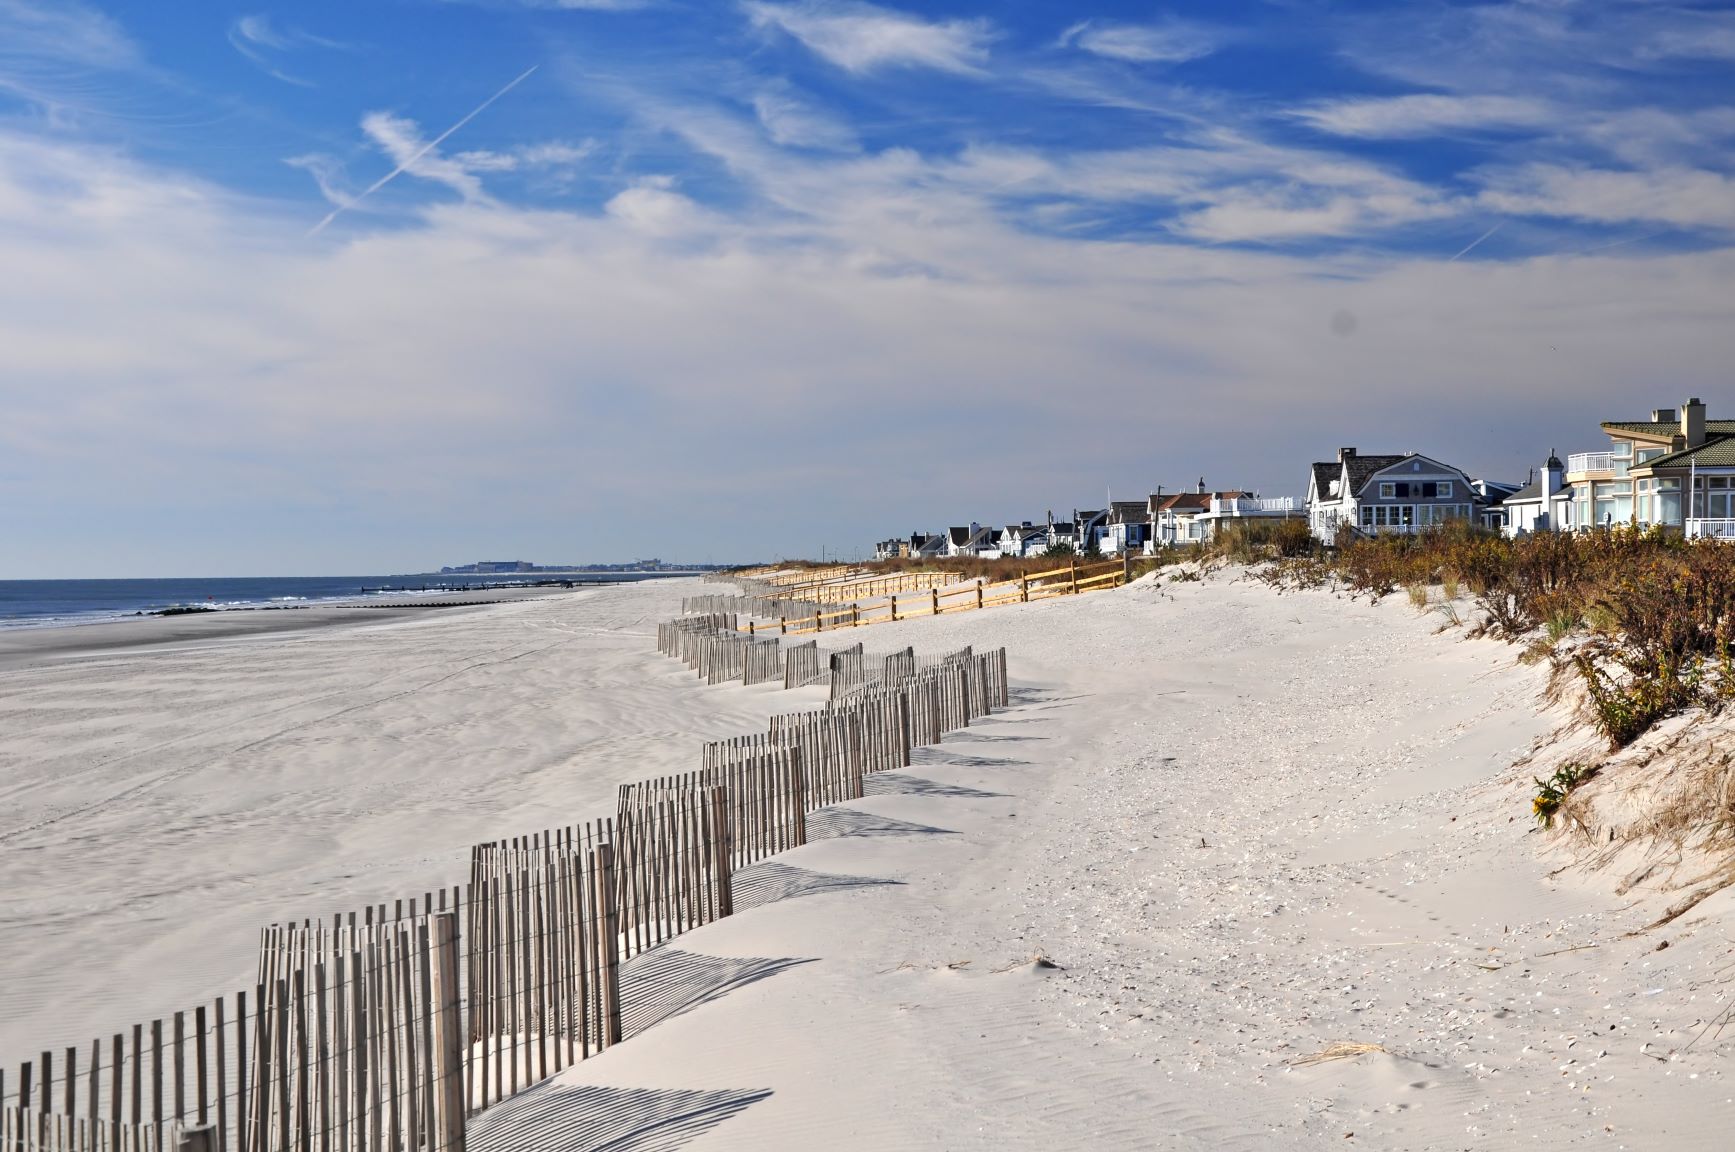 5 Things To Do In OCNJ During the Winter